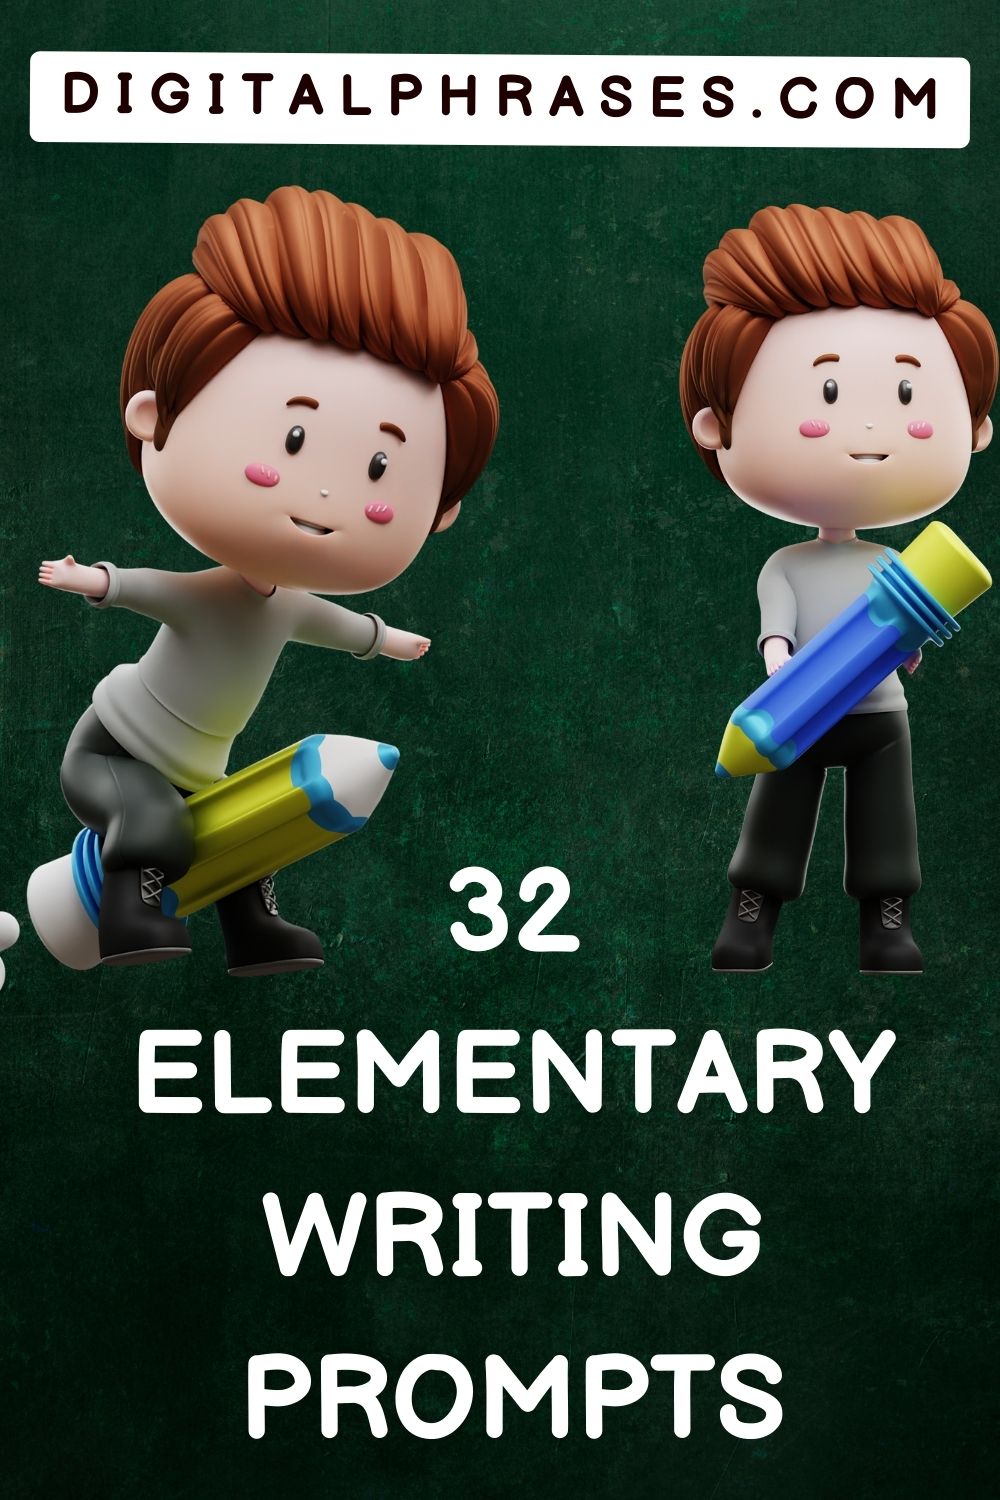 green background image with text - 32 Elementary Writing Prompts